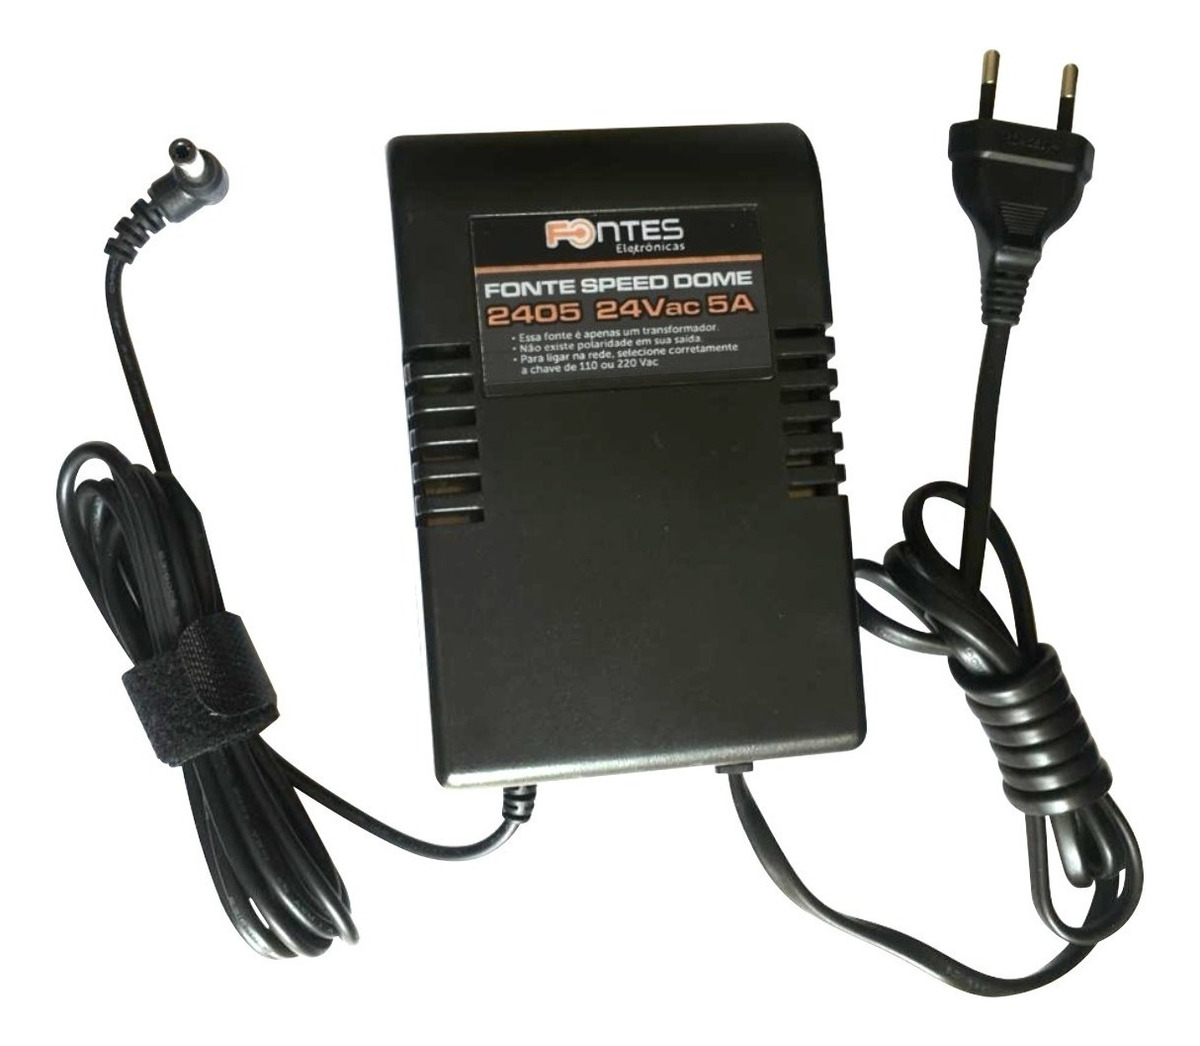 MZ POWER SUPPLY 24VAC 2.5A SPEED DOME